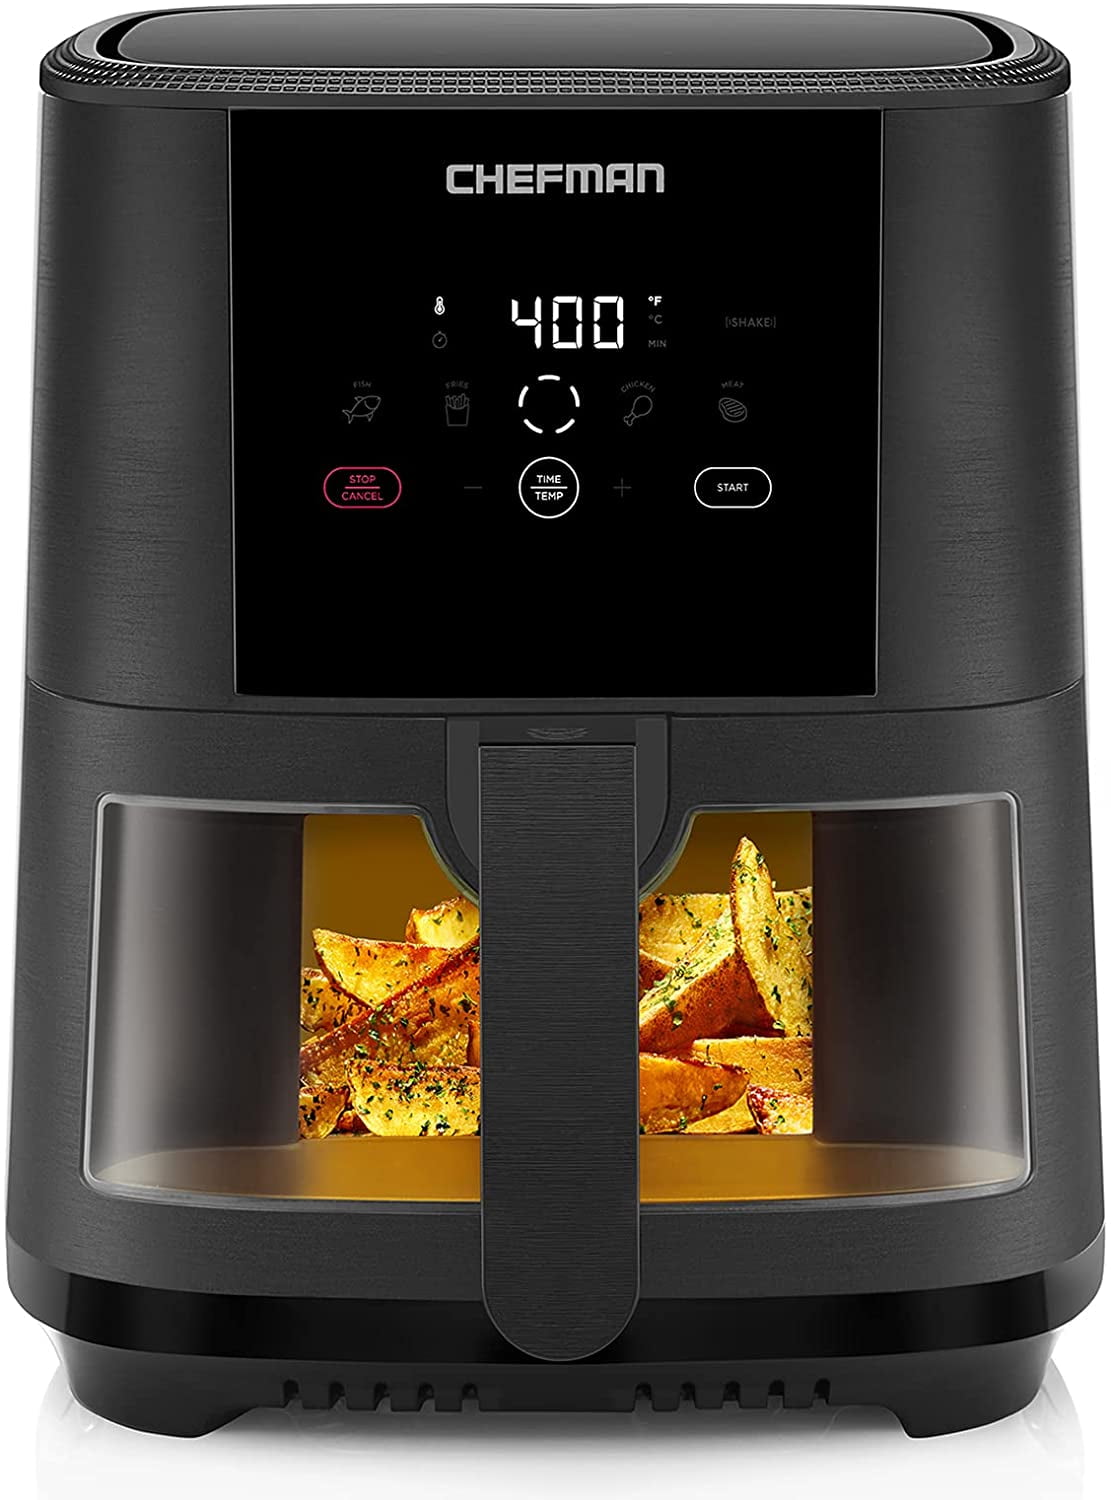 Chefman TurboTouch Easy View Air Fryer, Cook Oil-Free, Convenient Window, 5 Quarts